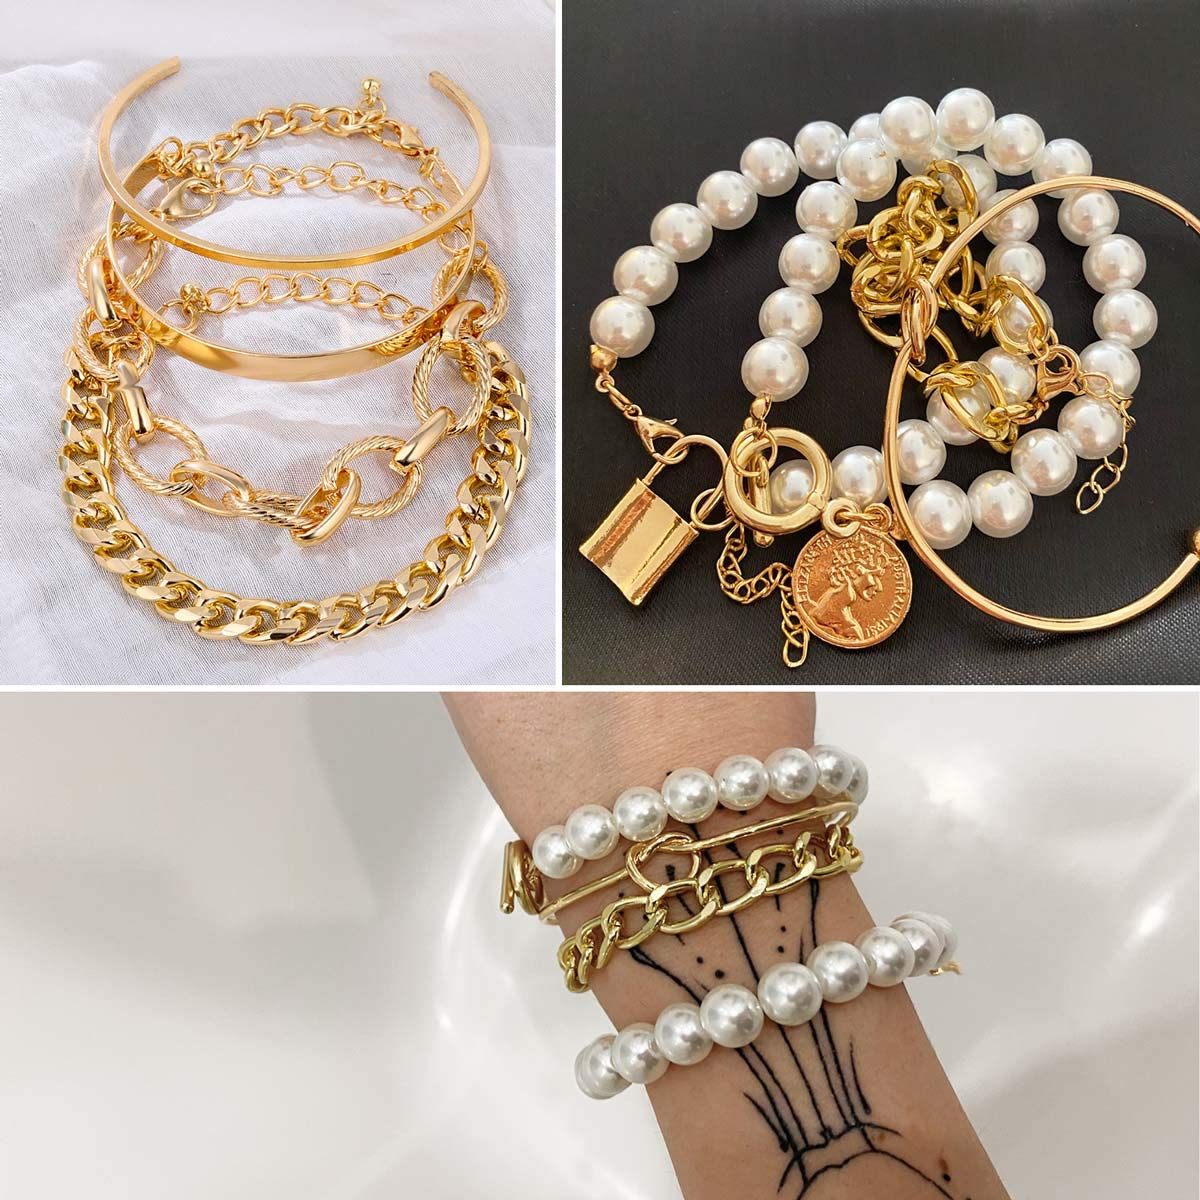 Buy Silkies Combo Pack, Bracelets and Necklaces (Pack of 24) at